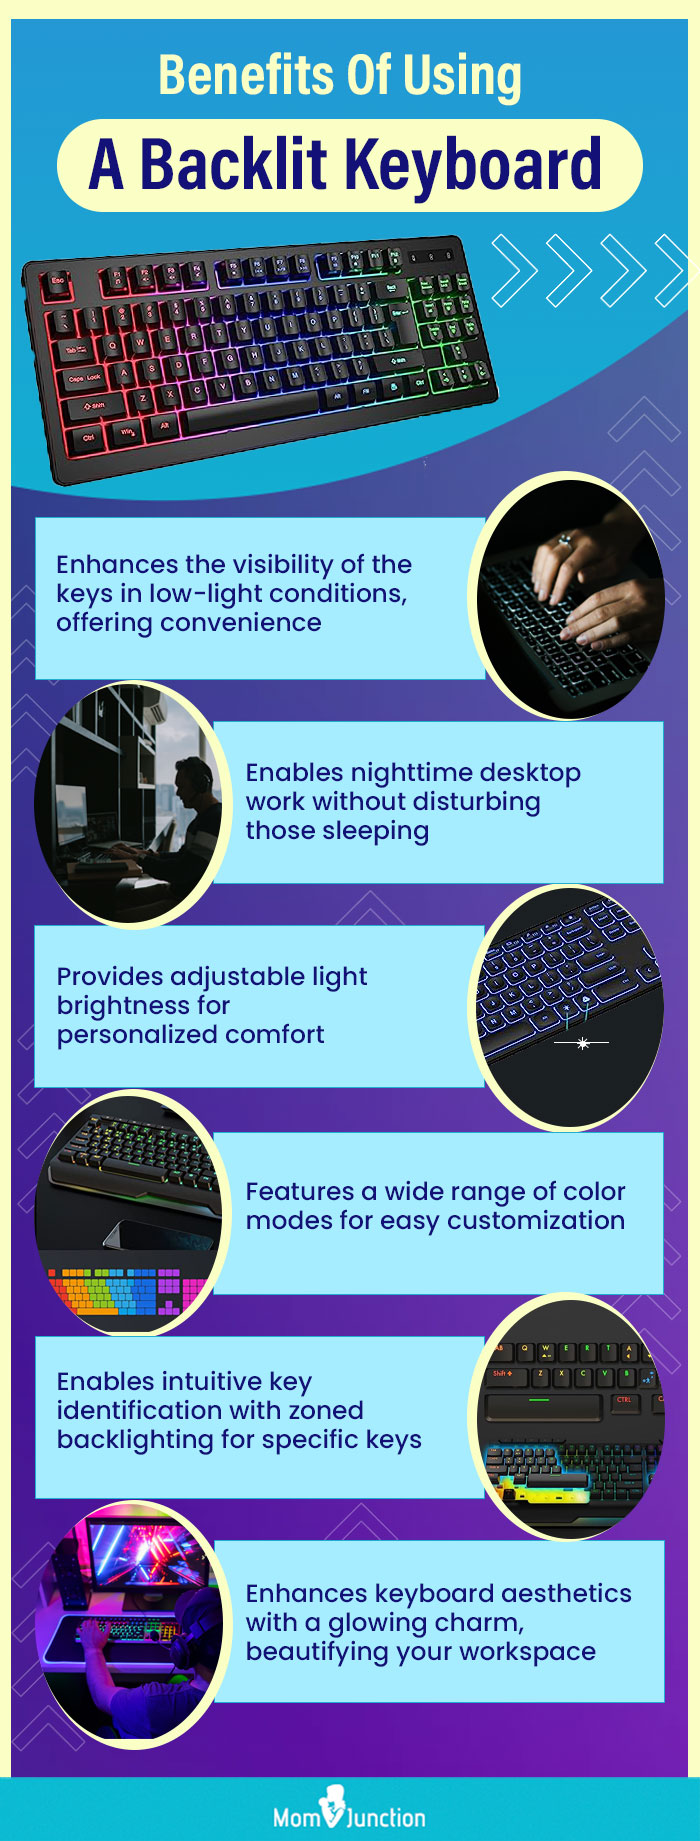 Benefits Of Using A Backlit Keyboard (infographic)